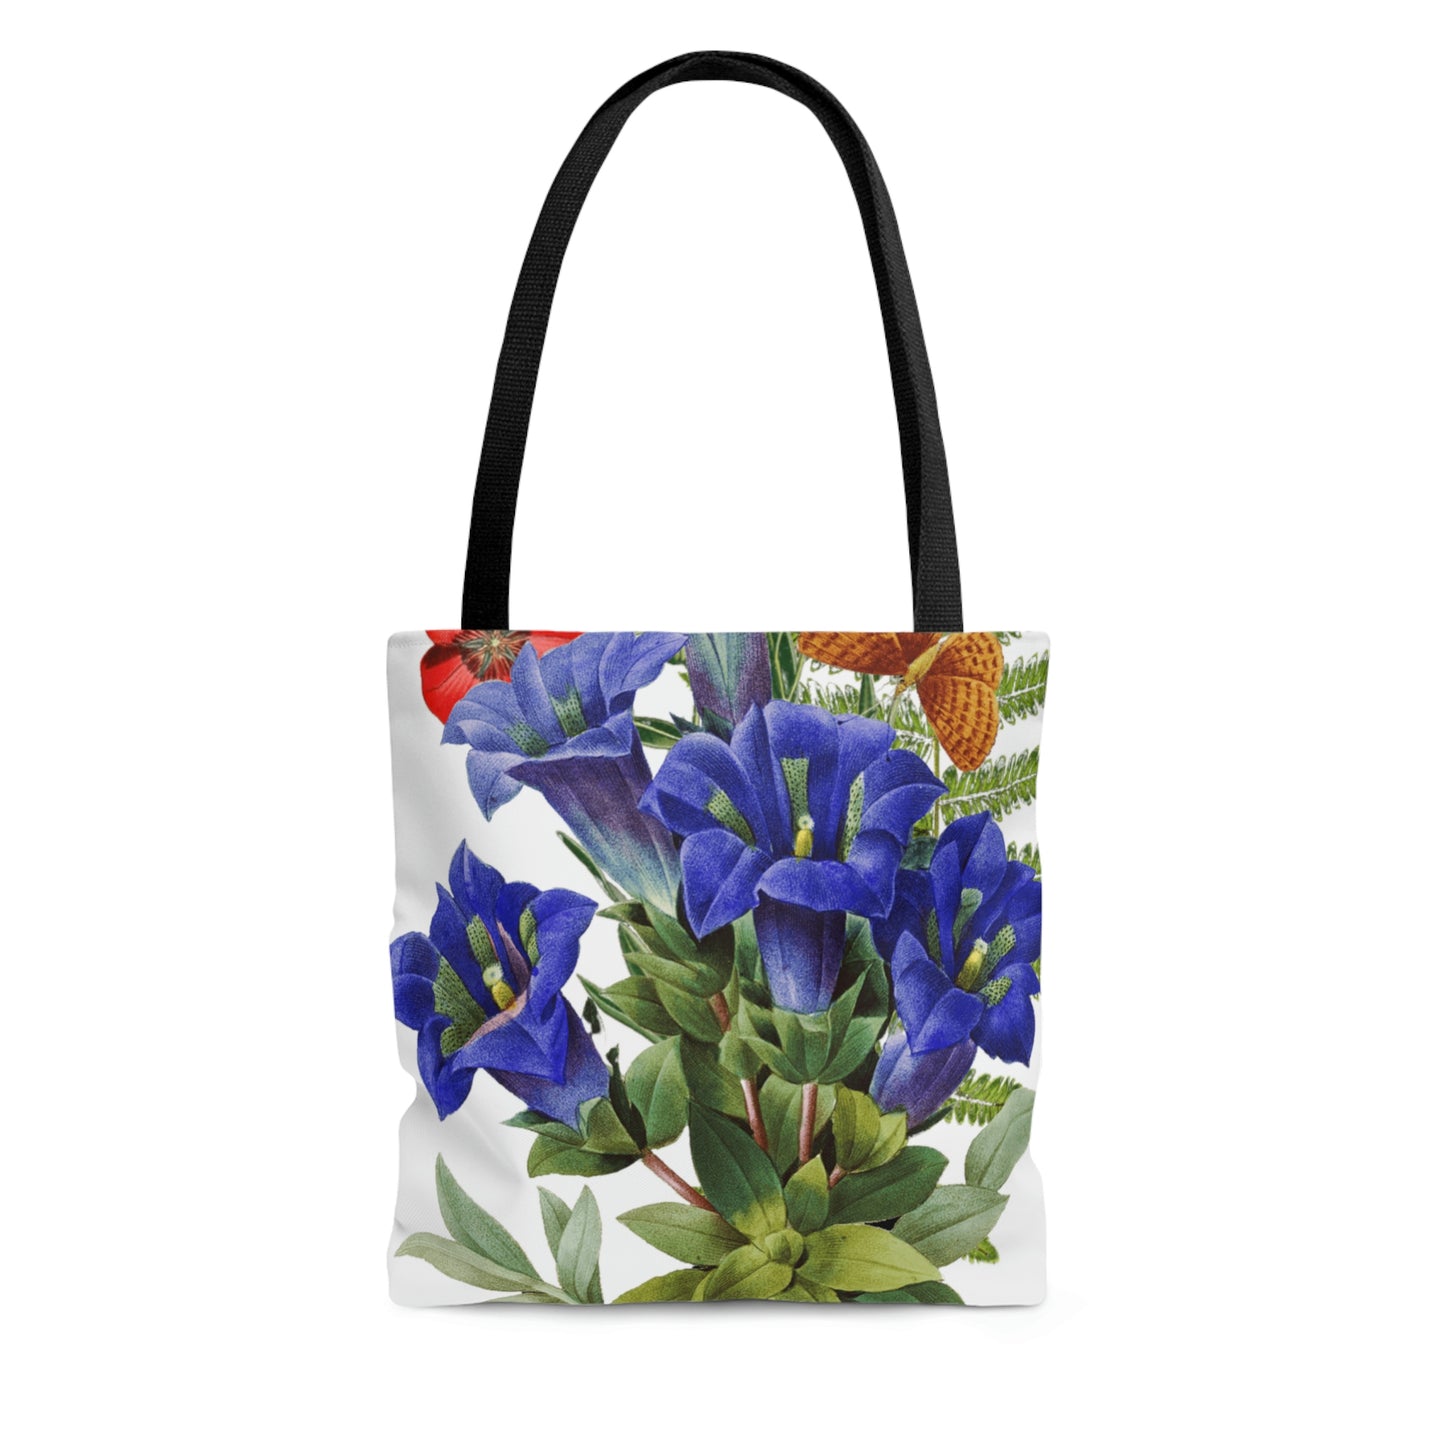 High Quality, All-Over Print Tote Bag, Flowers, Petunias, Wildflowers